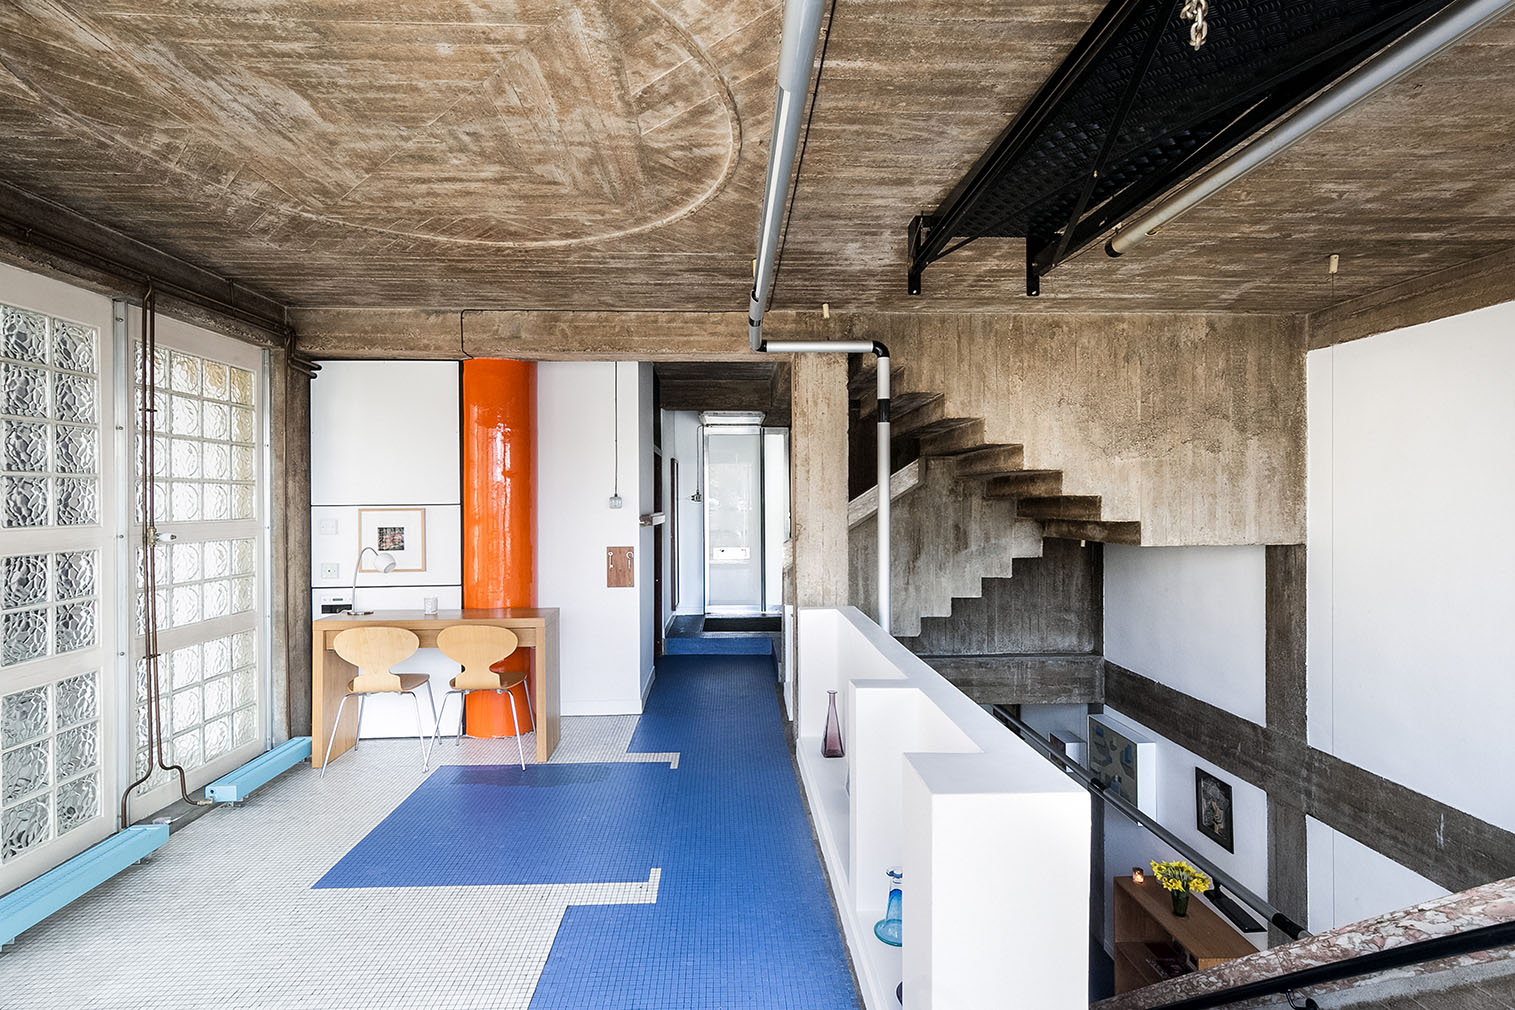 Property of the week: an architect’s Brutalist London home